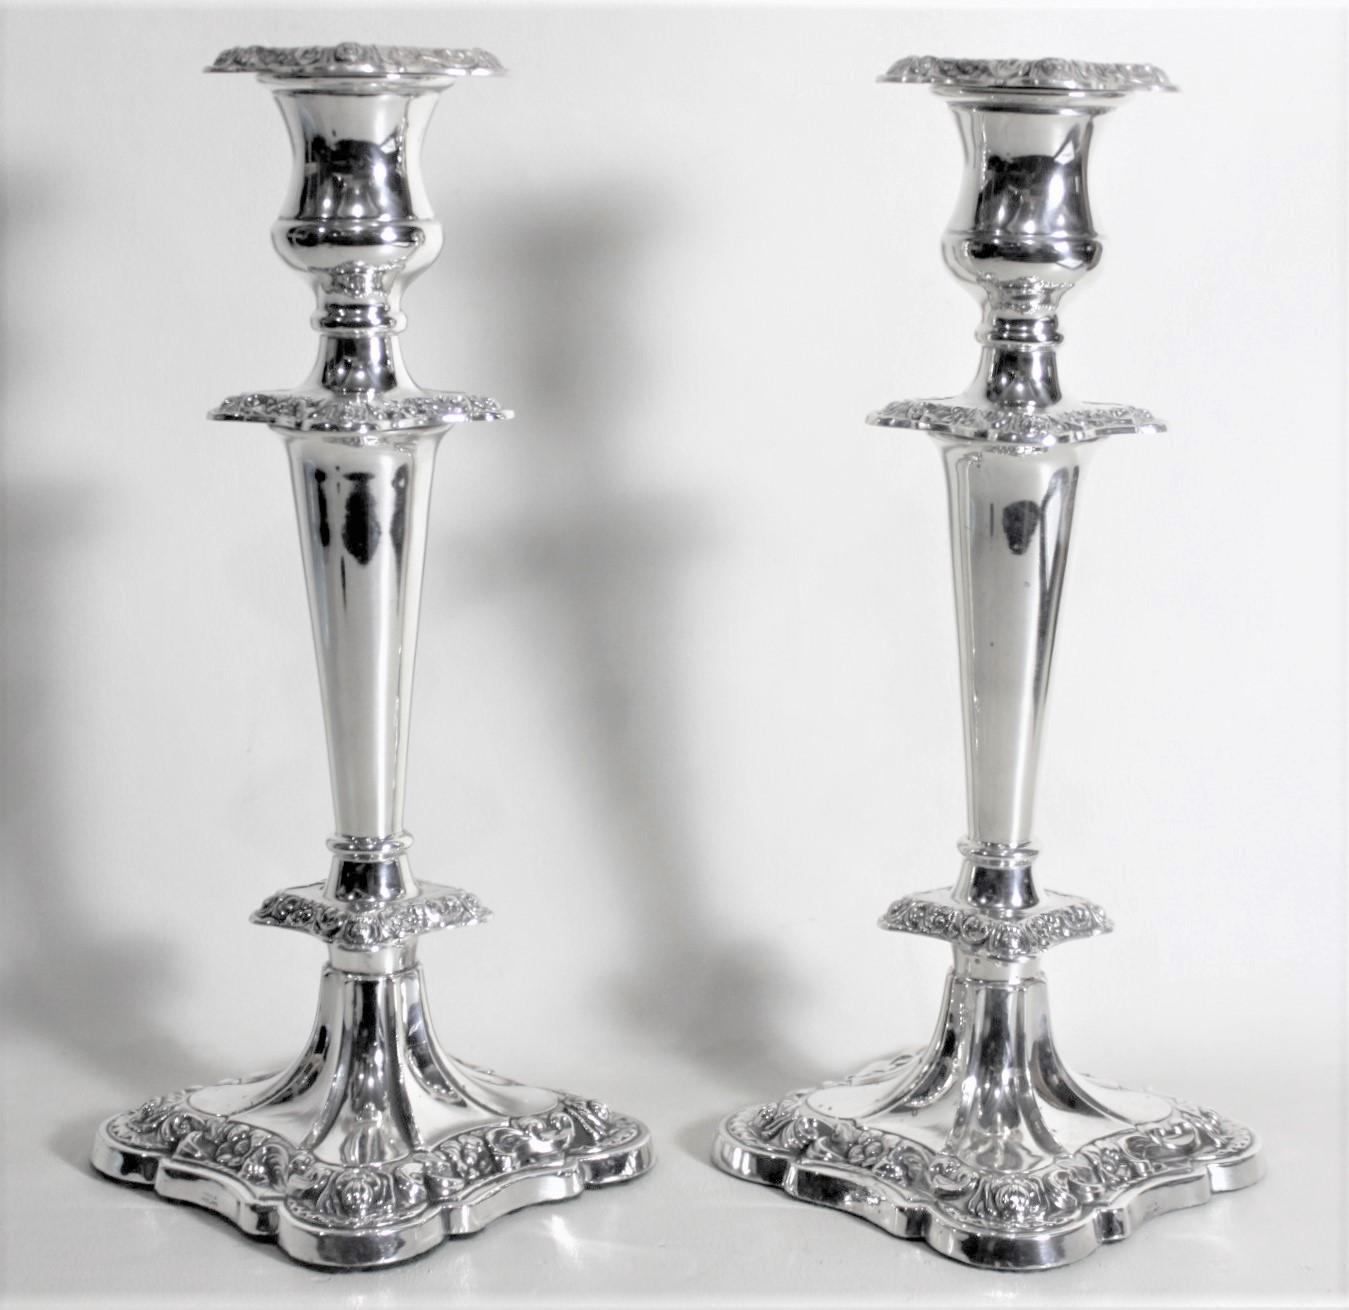 Edwardian Pair of English Sterling Silver Candlesticks with Chased Floral Decoration